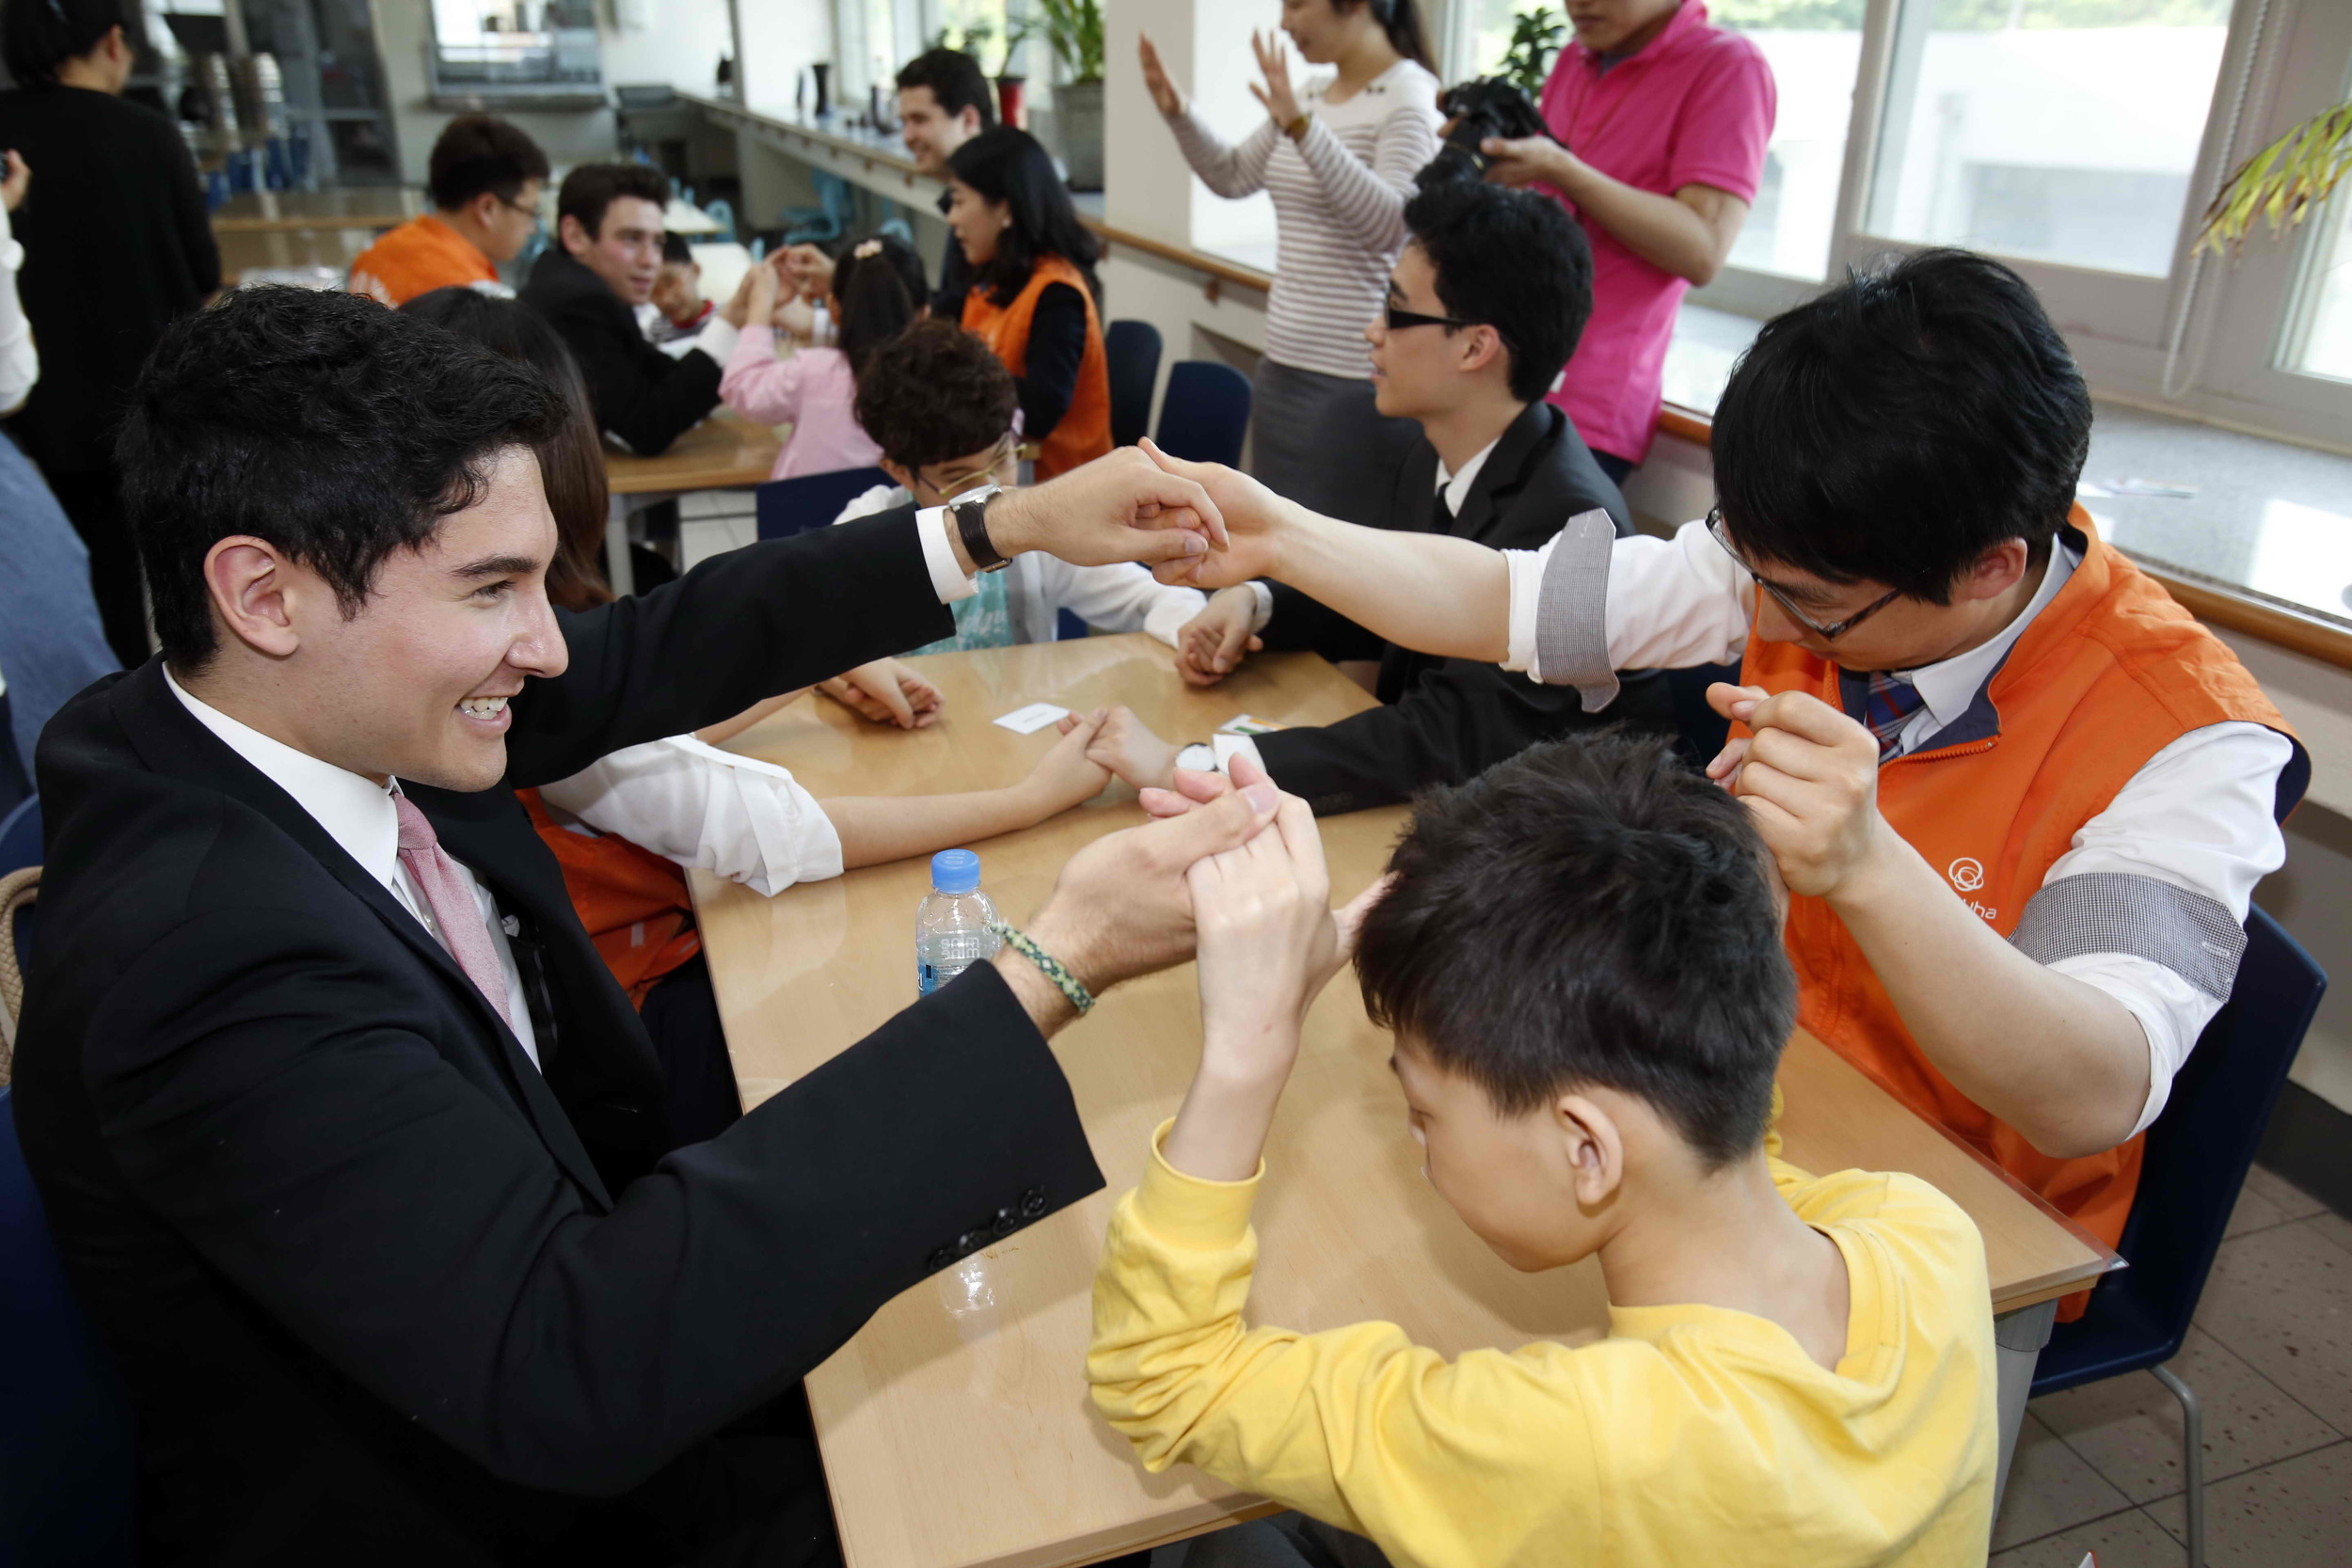 The Alley Cats interact with the students at the Seoul School for the Blind